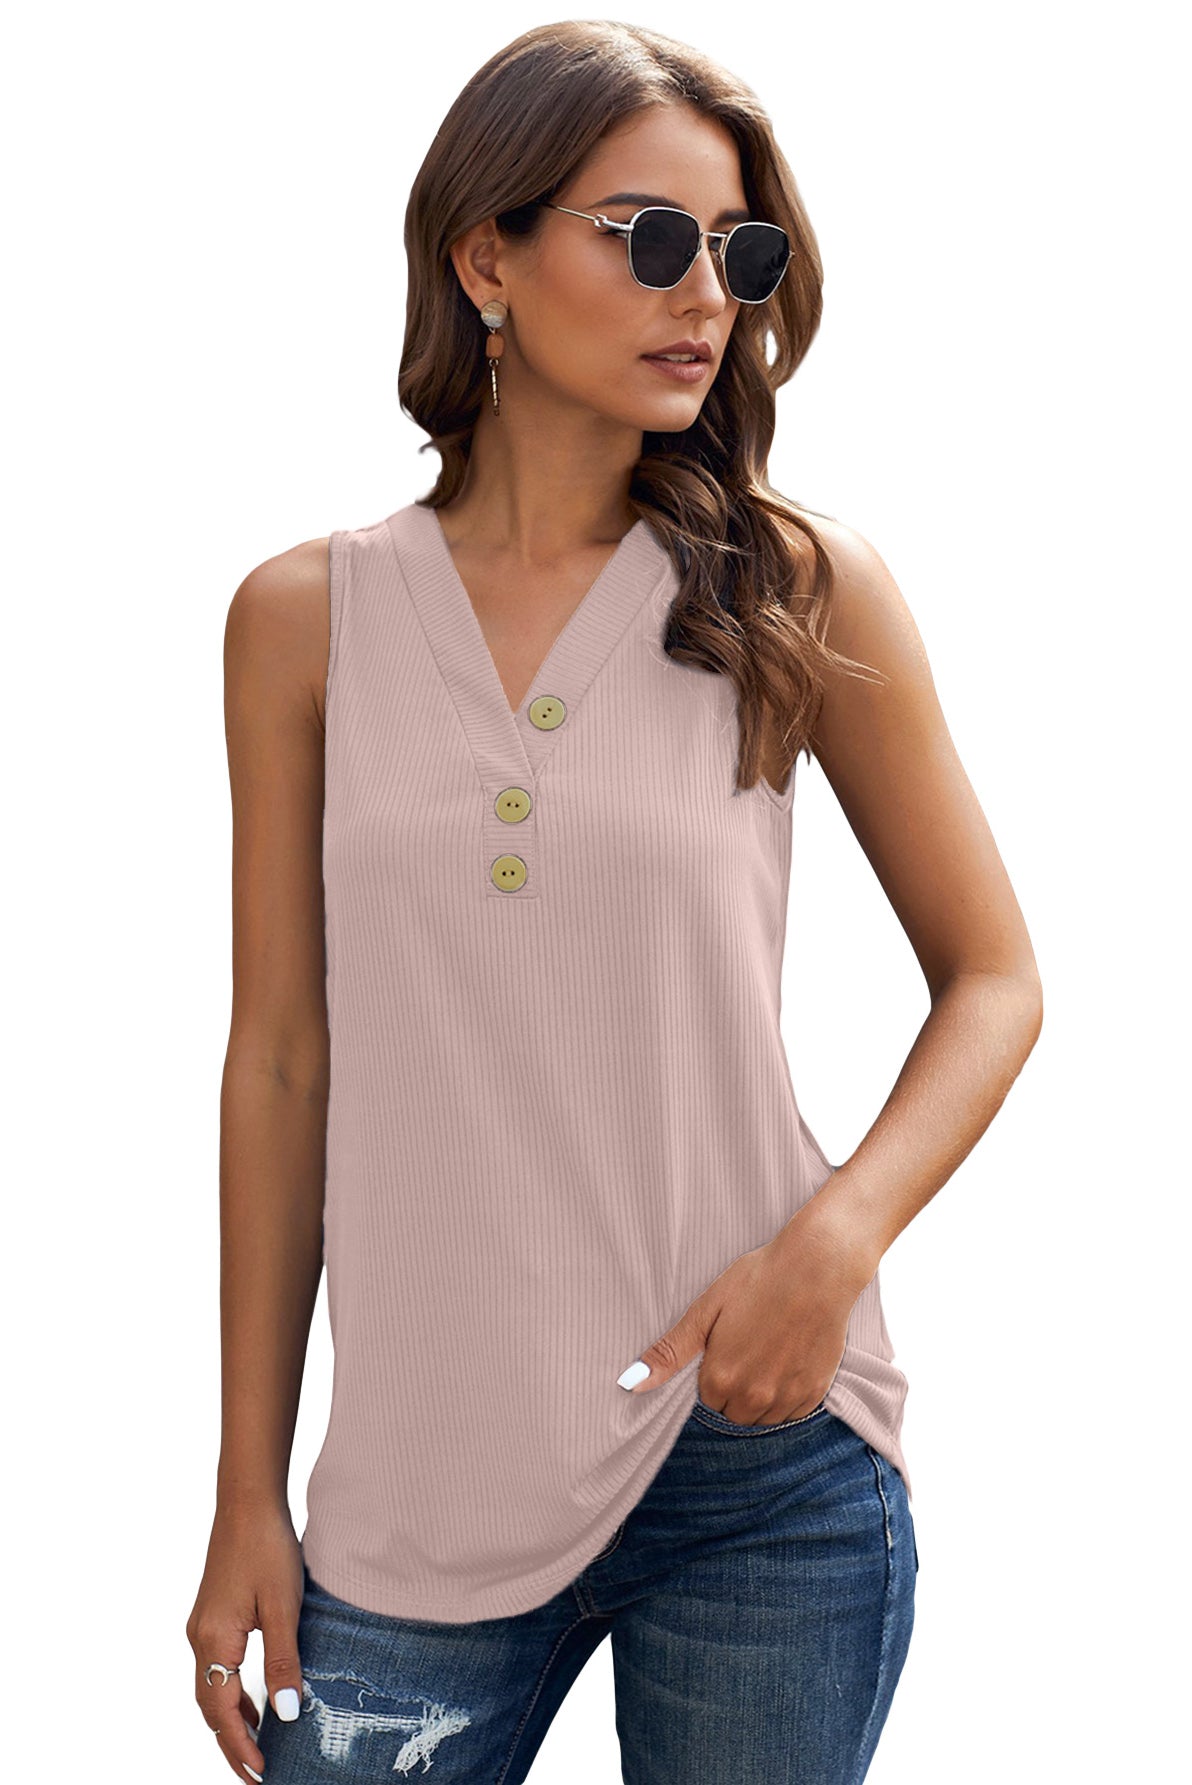 Button V Neck Casual Pink Rib-Knit Tank Top for Women